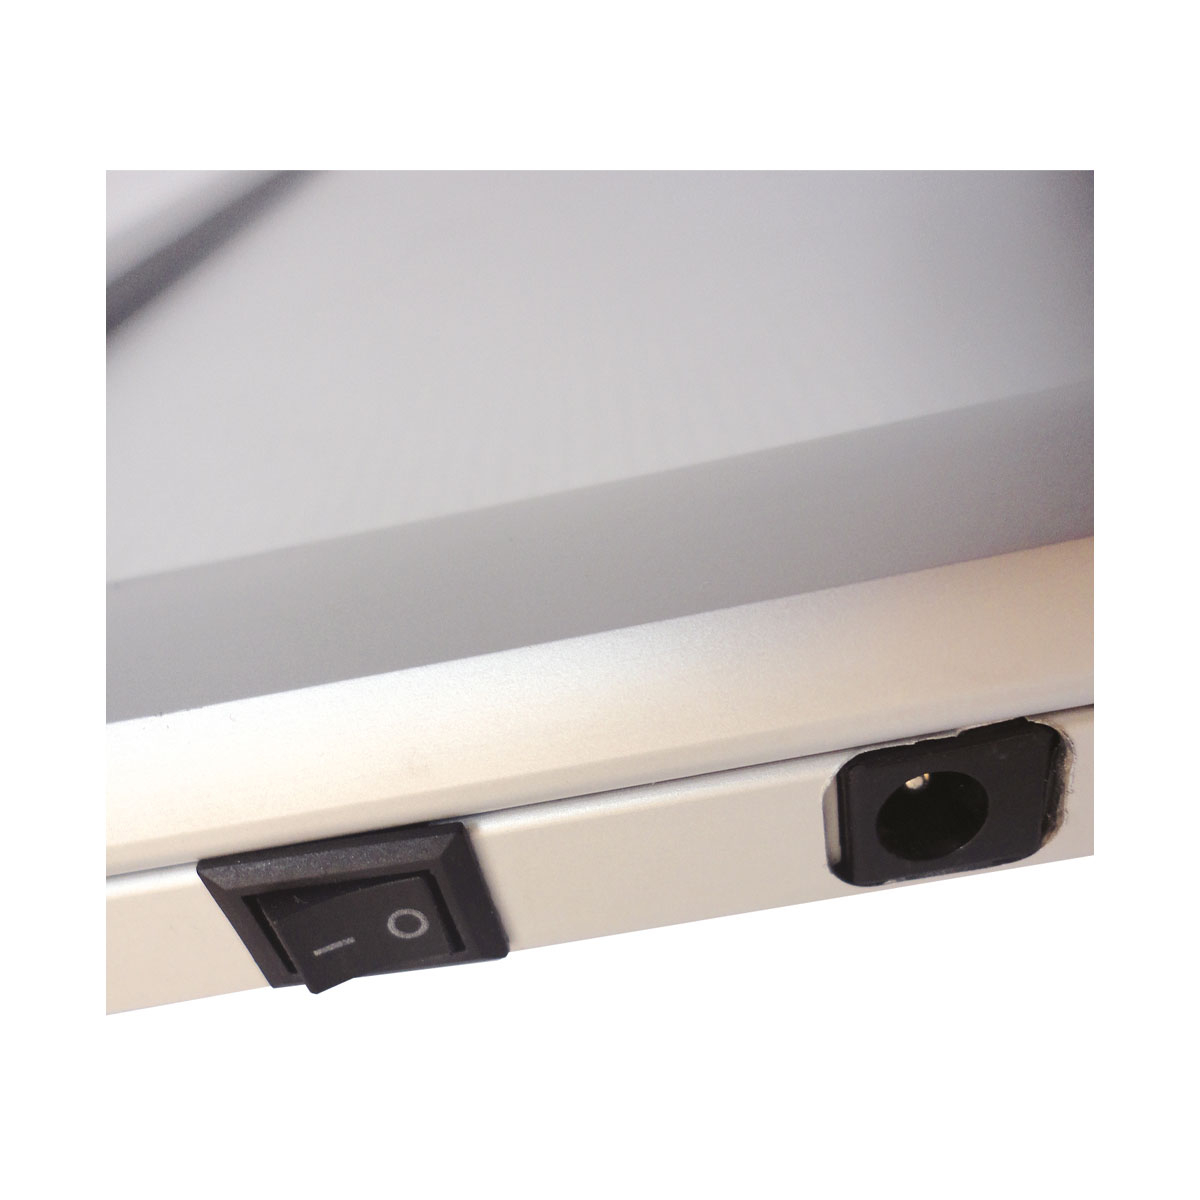 ILLUMINATE LED Poster Case On Off Switch is Located of The Bottom of The Poster Display Frame